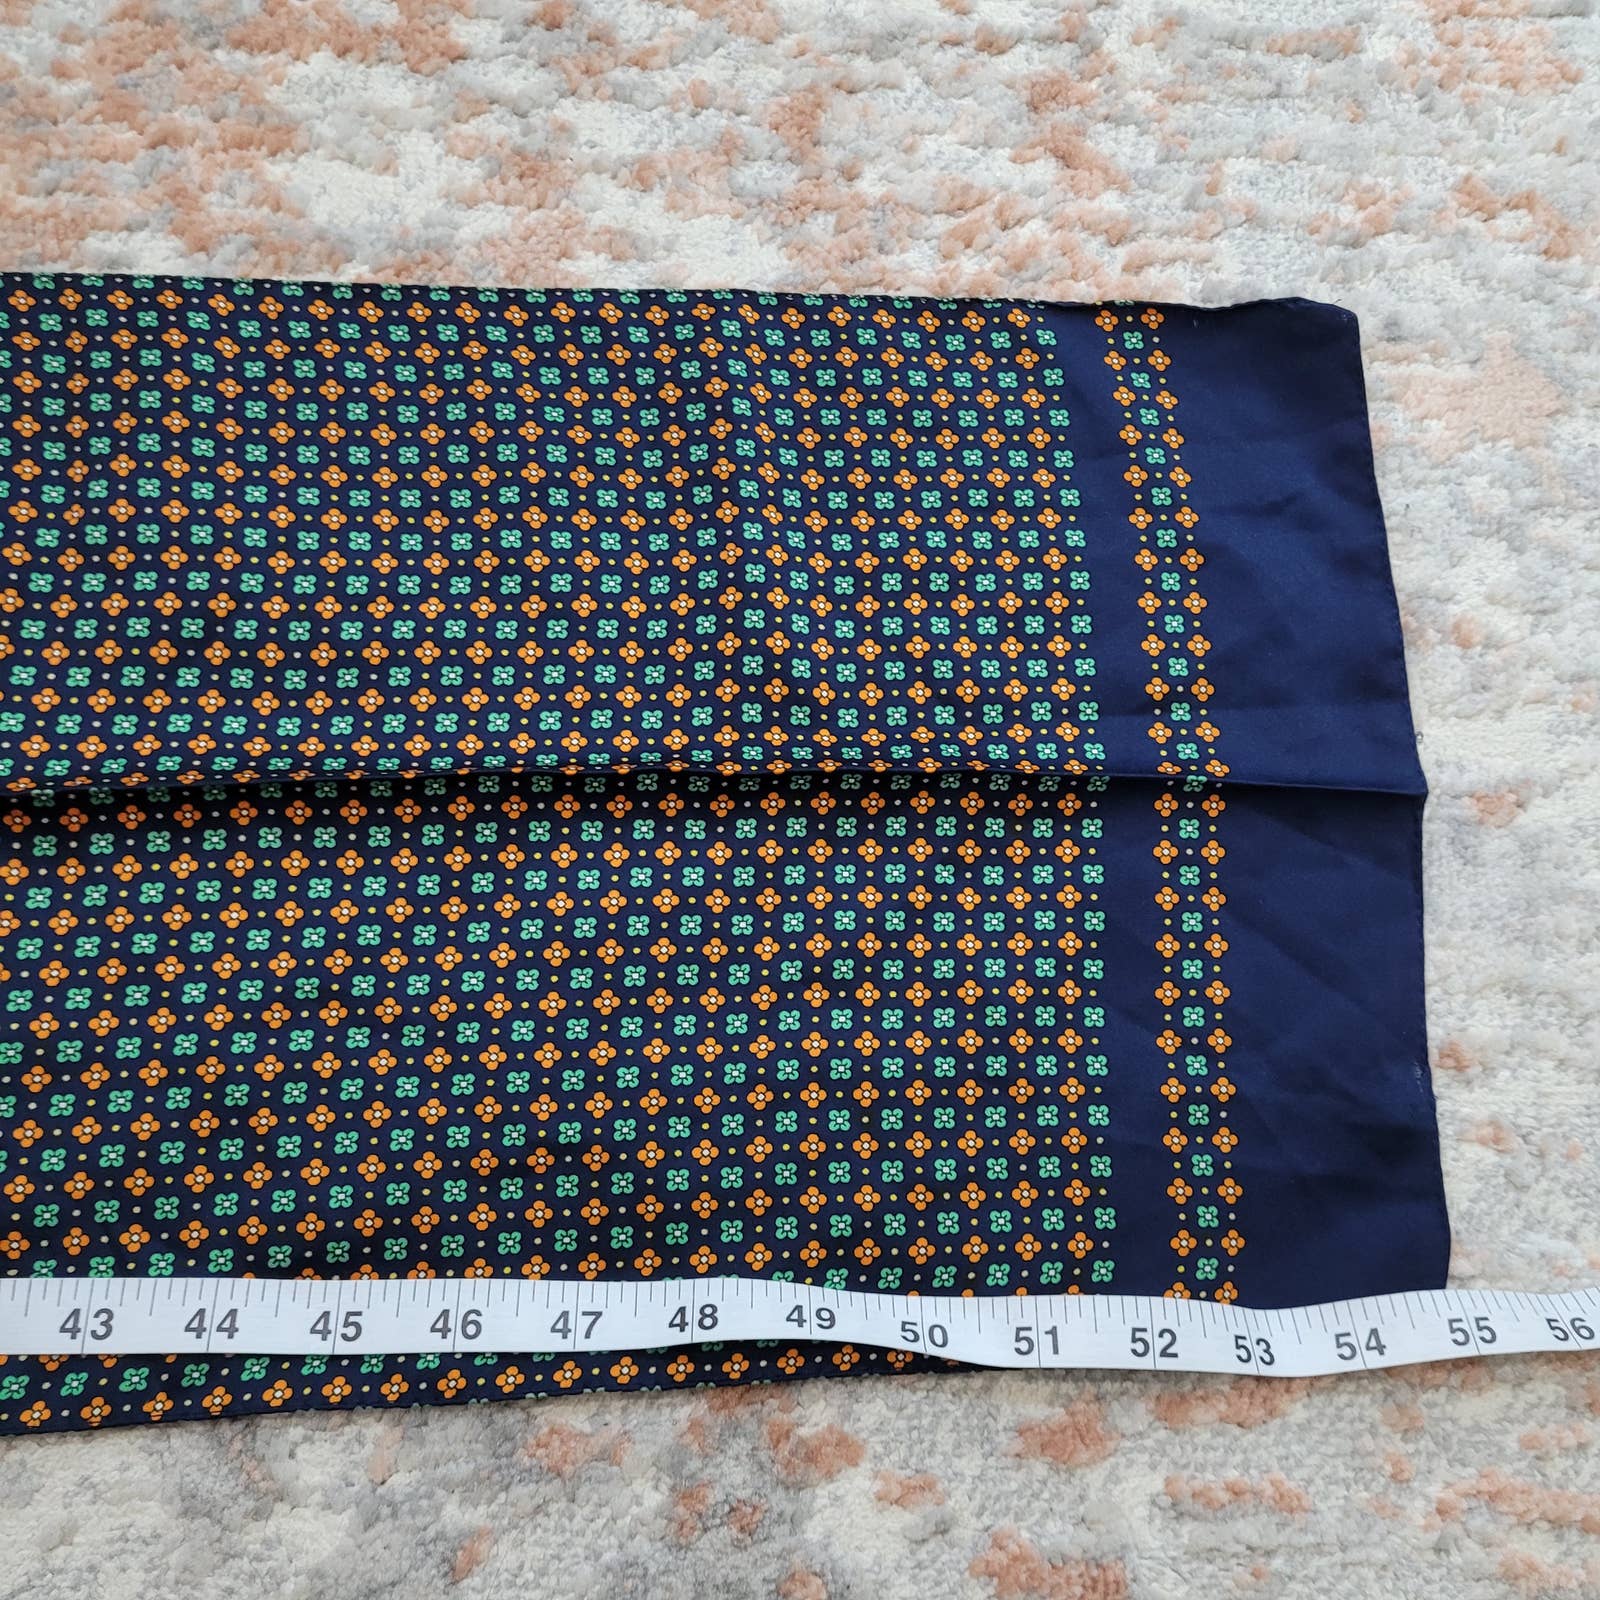 Rectangular Blue Scarf with Orange and Green Floral PatternMarkita's ClosetUnbranded